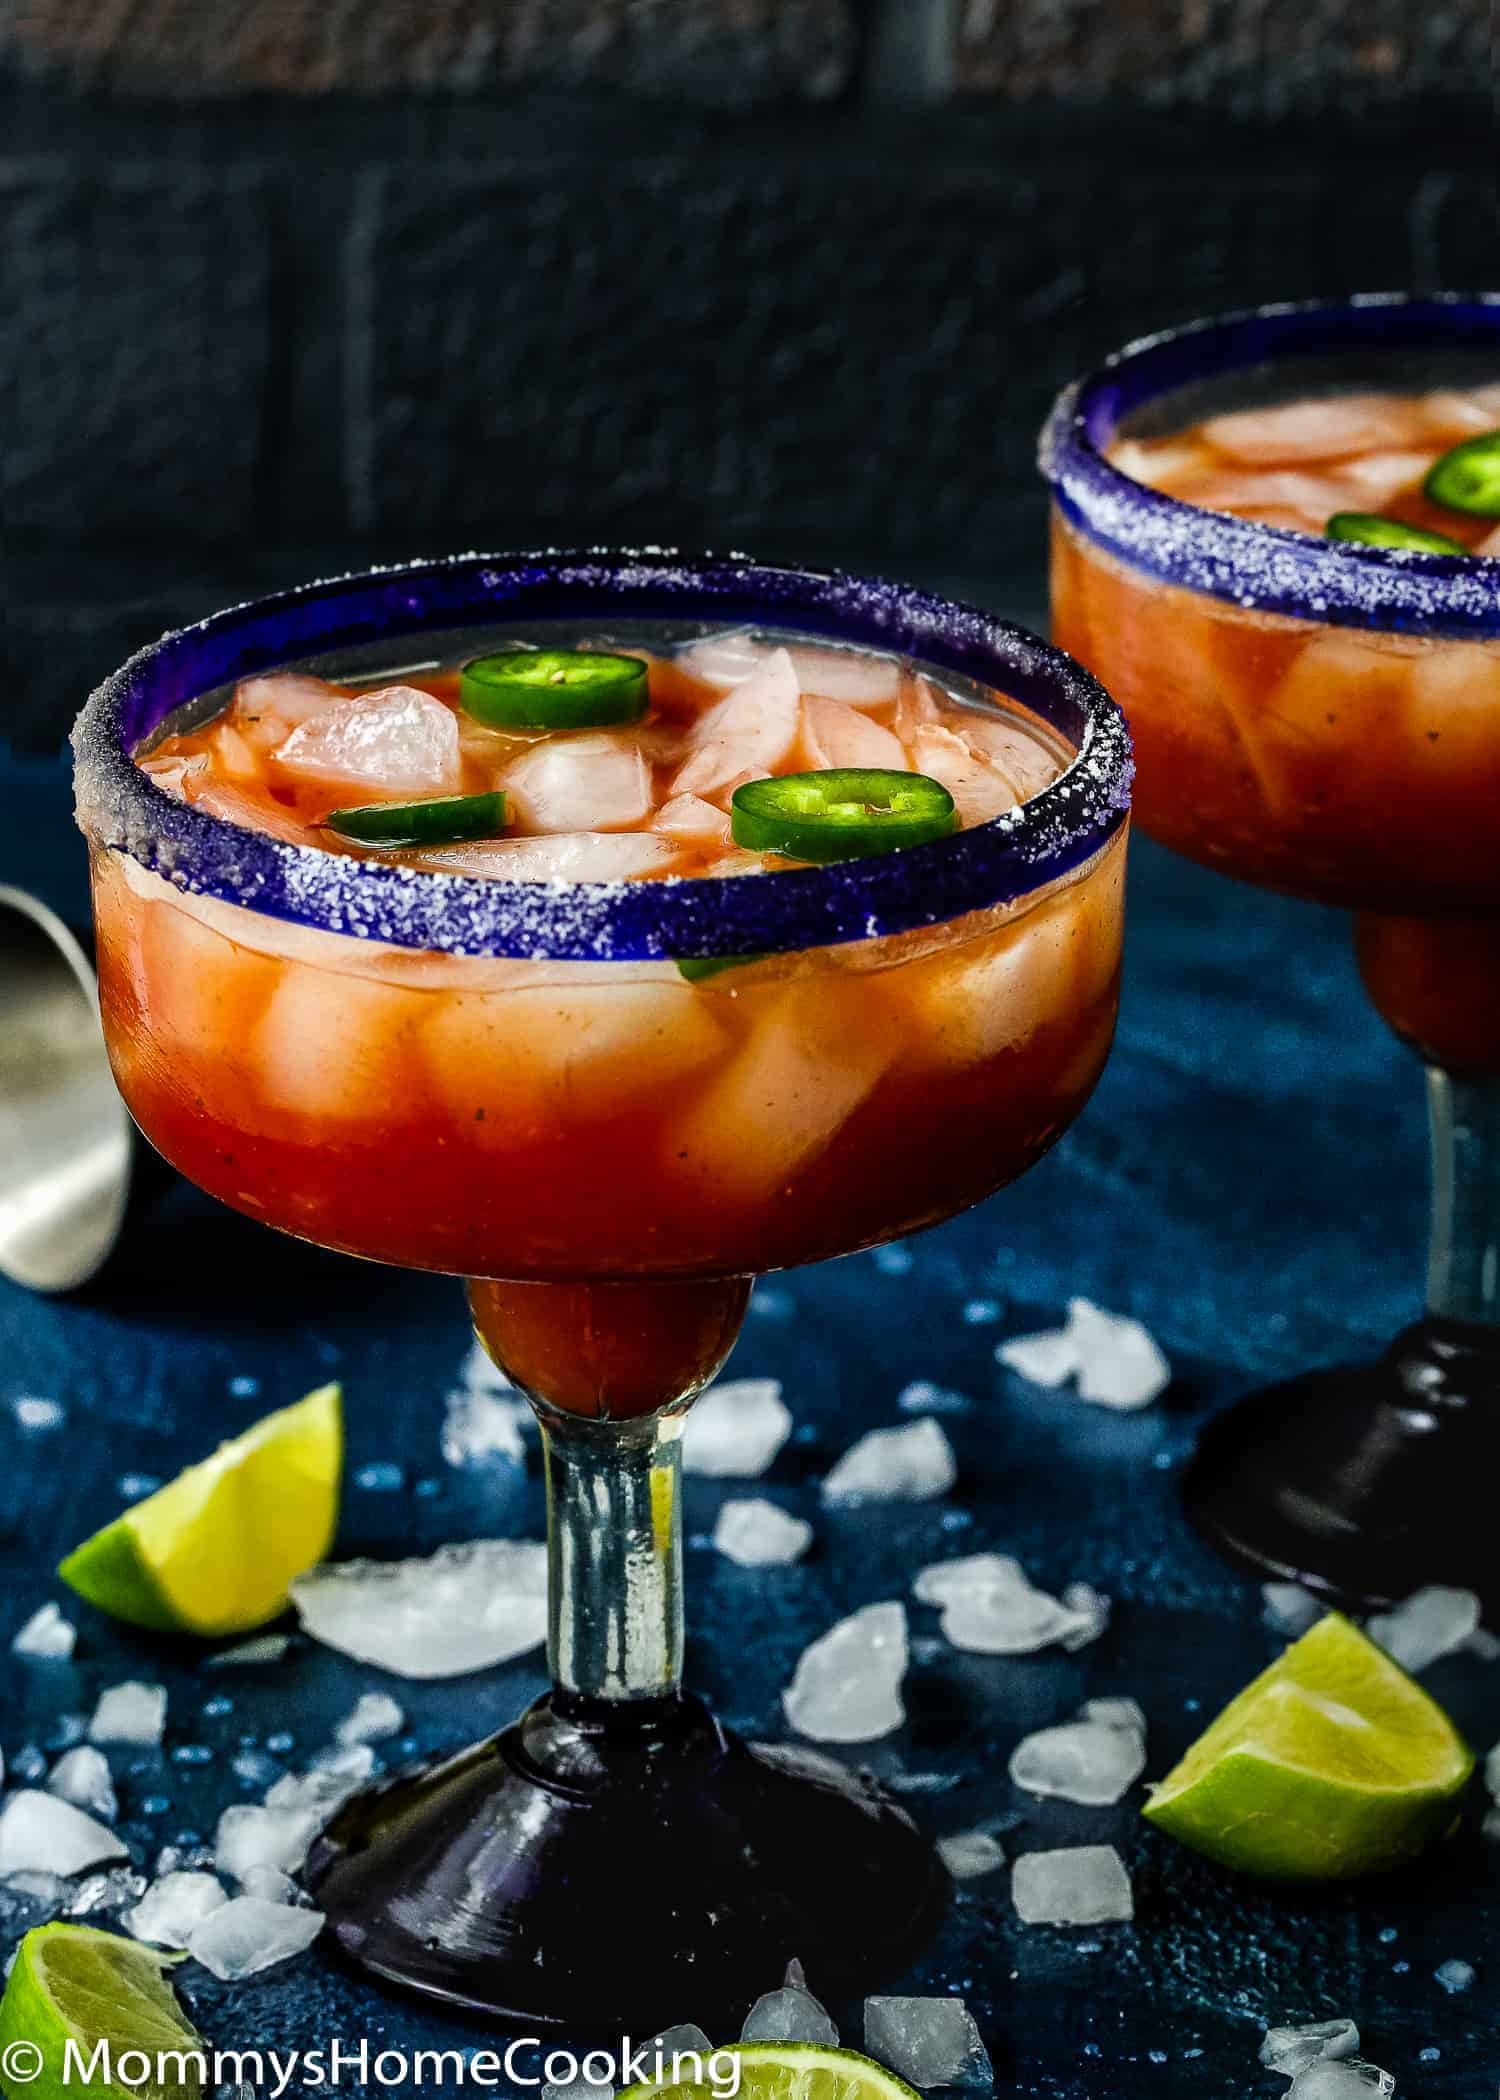 This Spicy Salsa Margarita is boozy, refreshing, citrusy and totally irresistible! This cocktail taste like the perfect combination of a bloody mary and a margarita, all in one sip. Made with fresh salsa, tequila, agave and lime, this delicious and different cocktail will knock your guests' socks off! https://mommyshomecooking.com